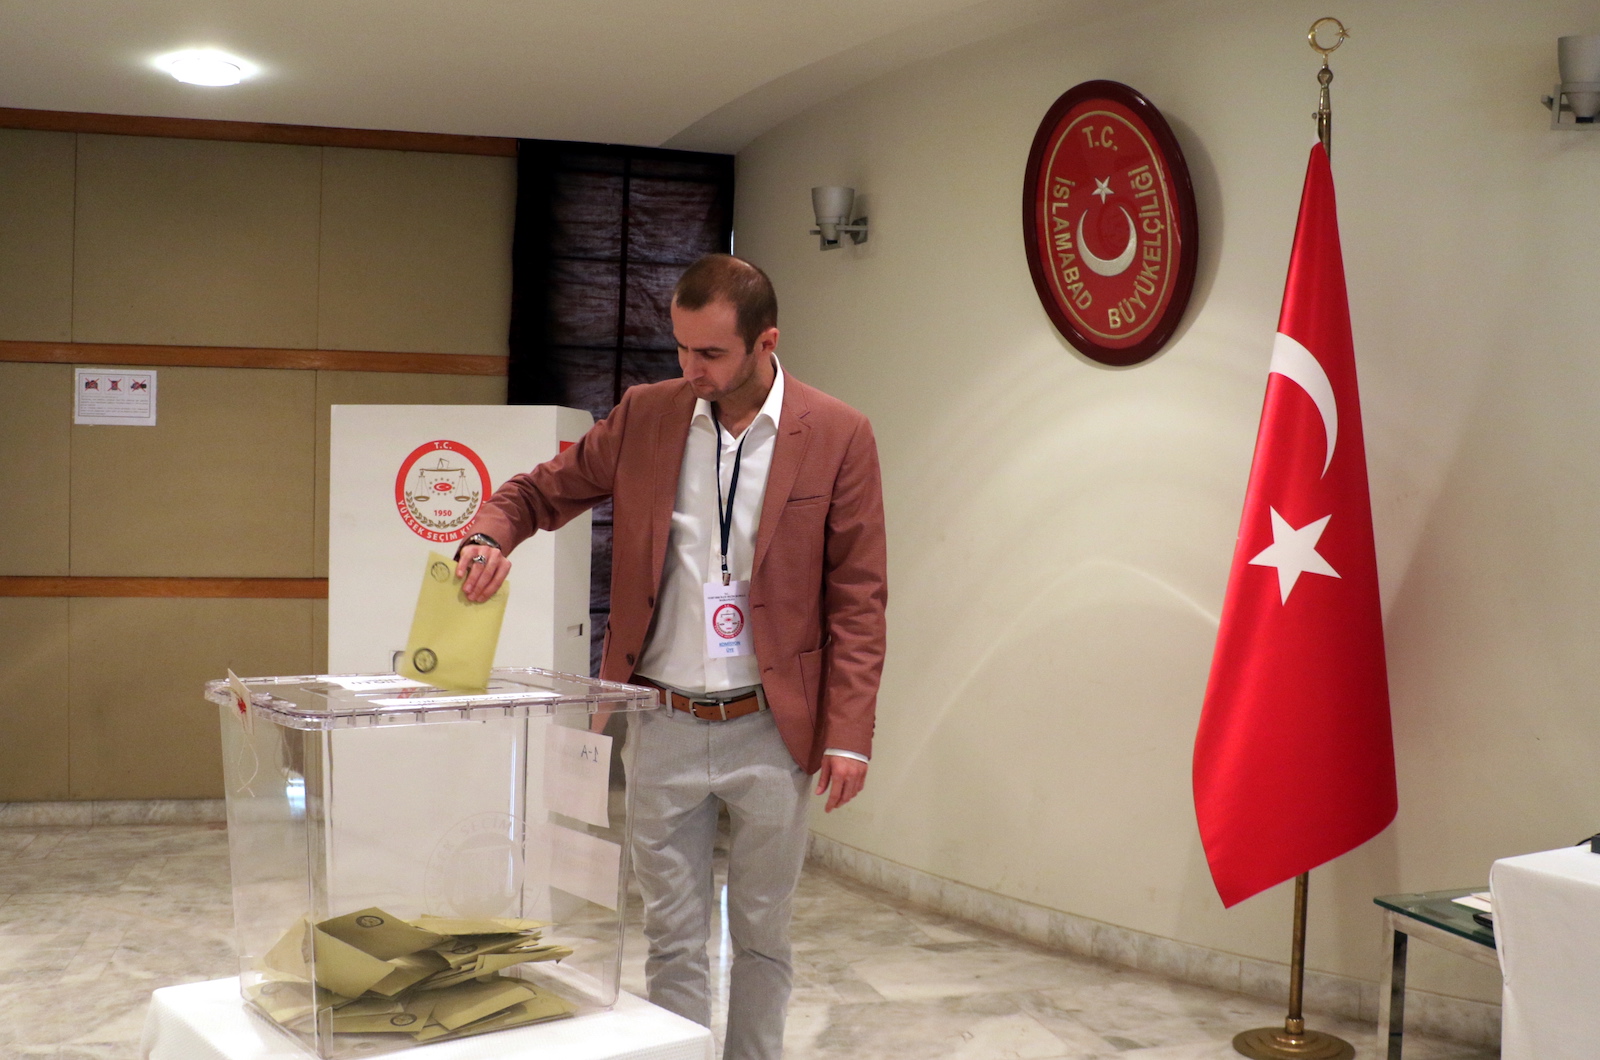 epa10611701 A Turkish citizen living abroad casts his ballot during Turkey's general elections at the embassy of Turkey, in Islamabad, Pakistan, 06 May 2023. General elections will be held in Turkey on 14 May 2023, with a two-round voting to elect the President of Turkey and parliamentary elections held simultaneously to elect the members of the Grand National Assembly of Turkey.  EPA/SOHAIL SHAHZAD